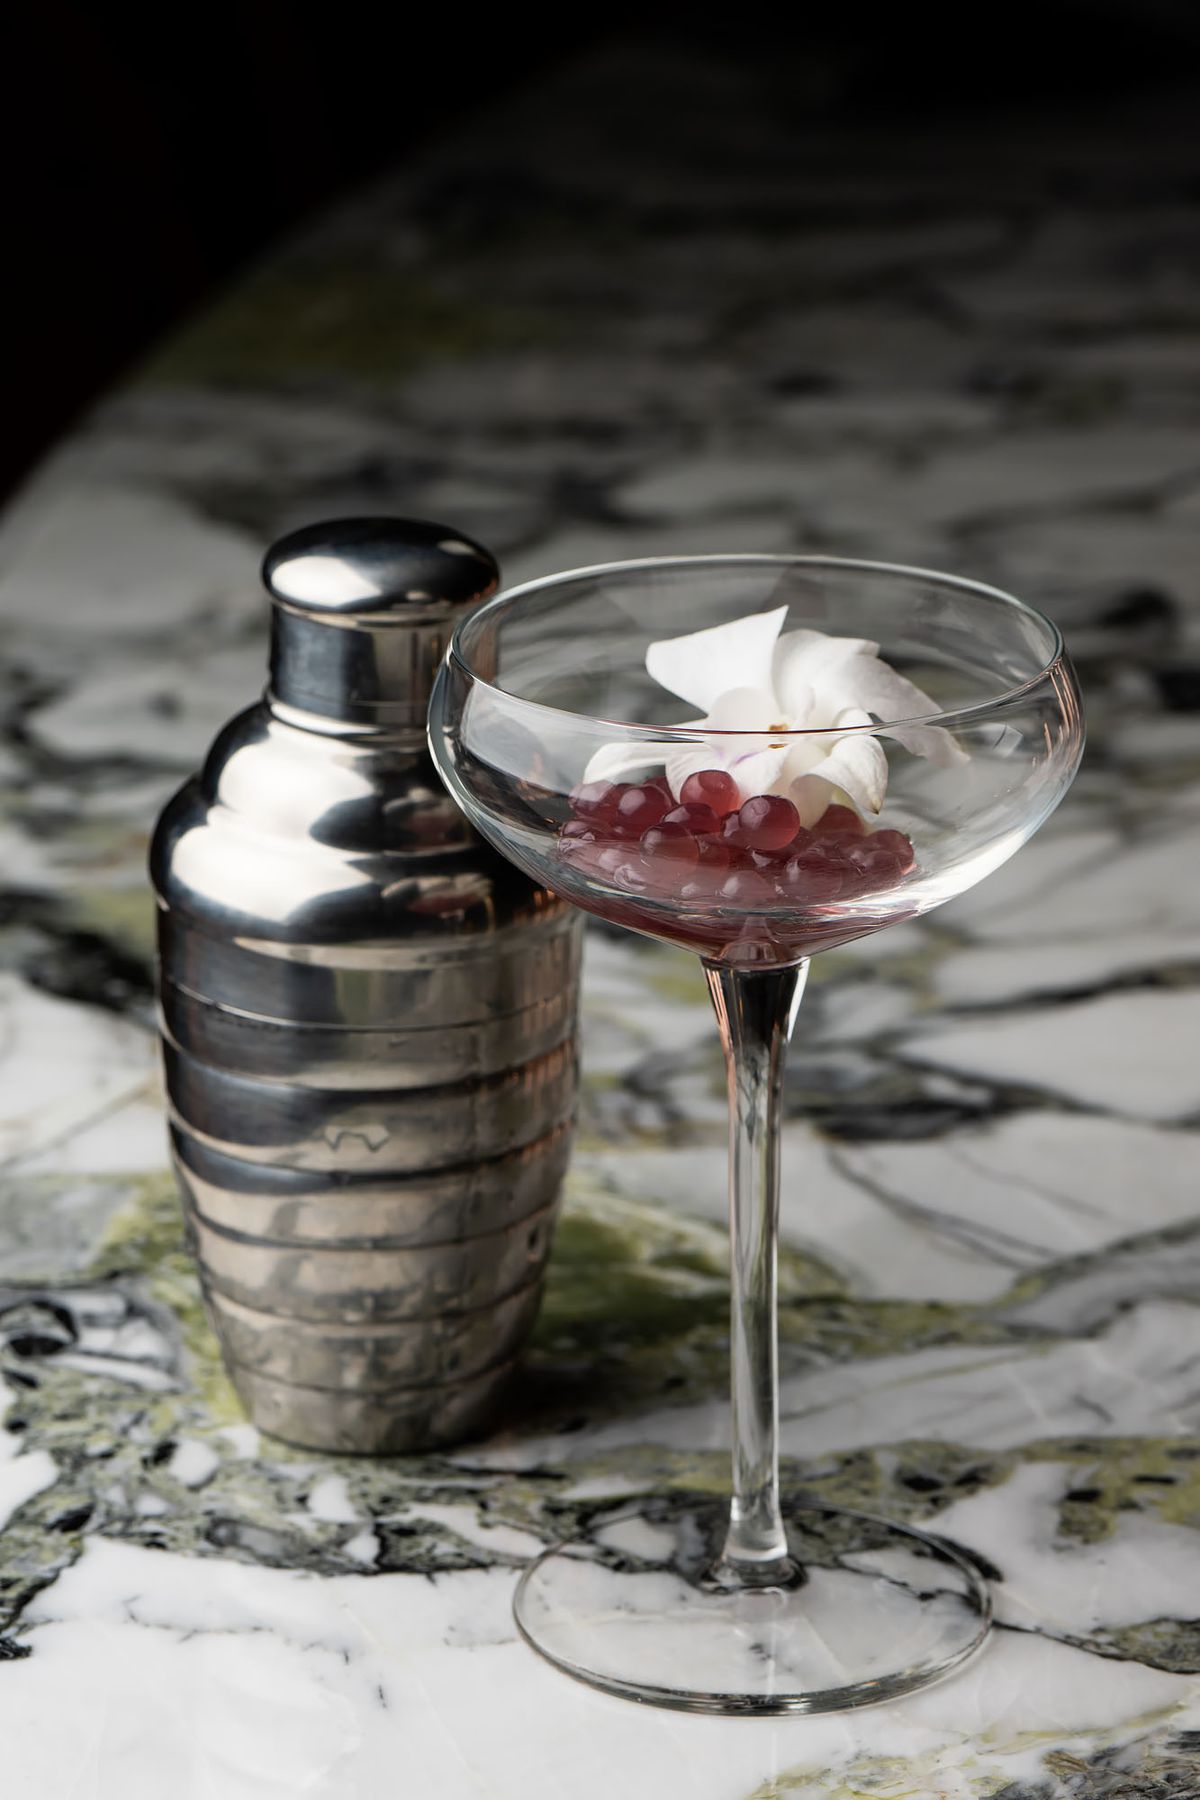 A cocktail at the ready with pomegranate, on a marble table.